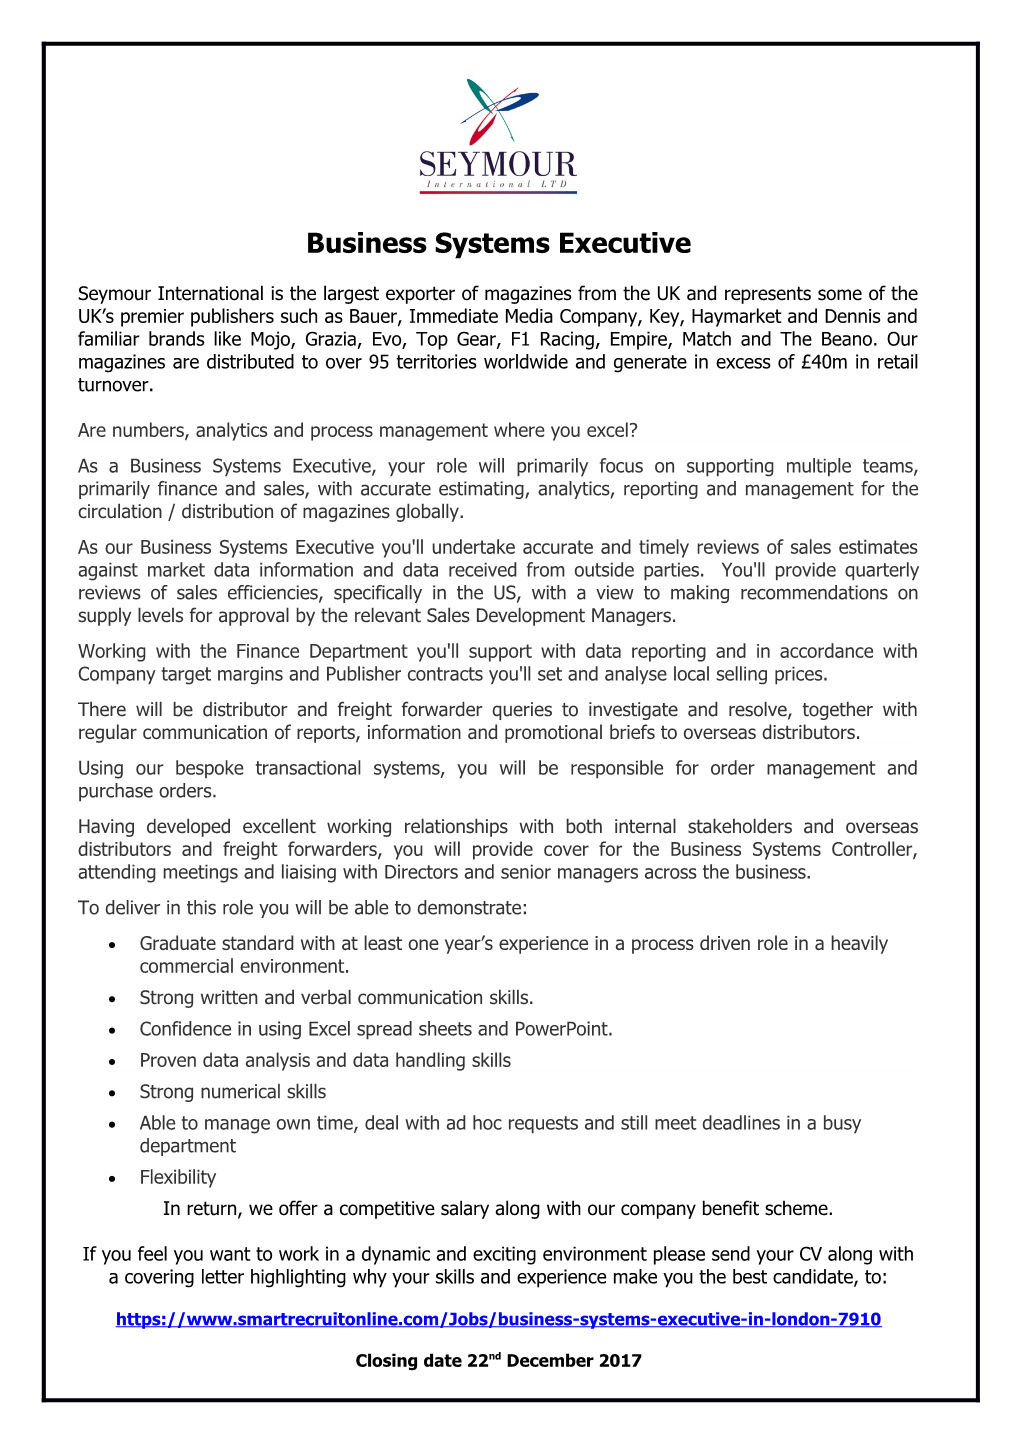 Business Systems Executive